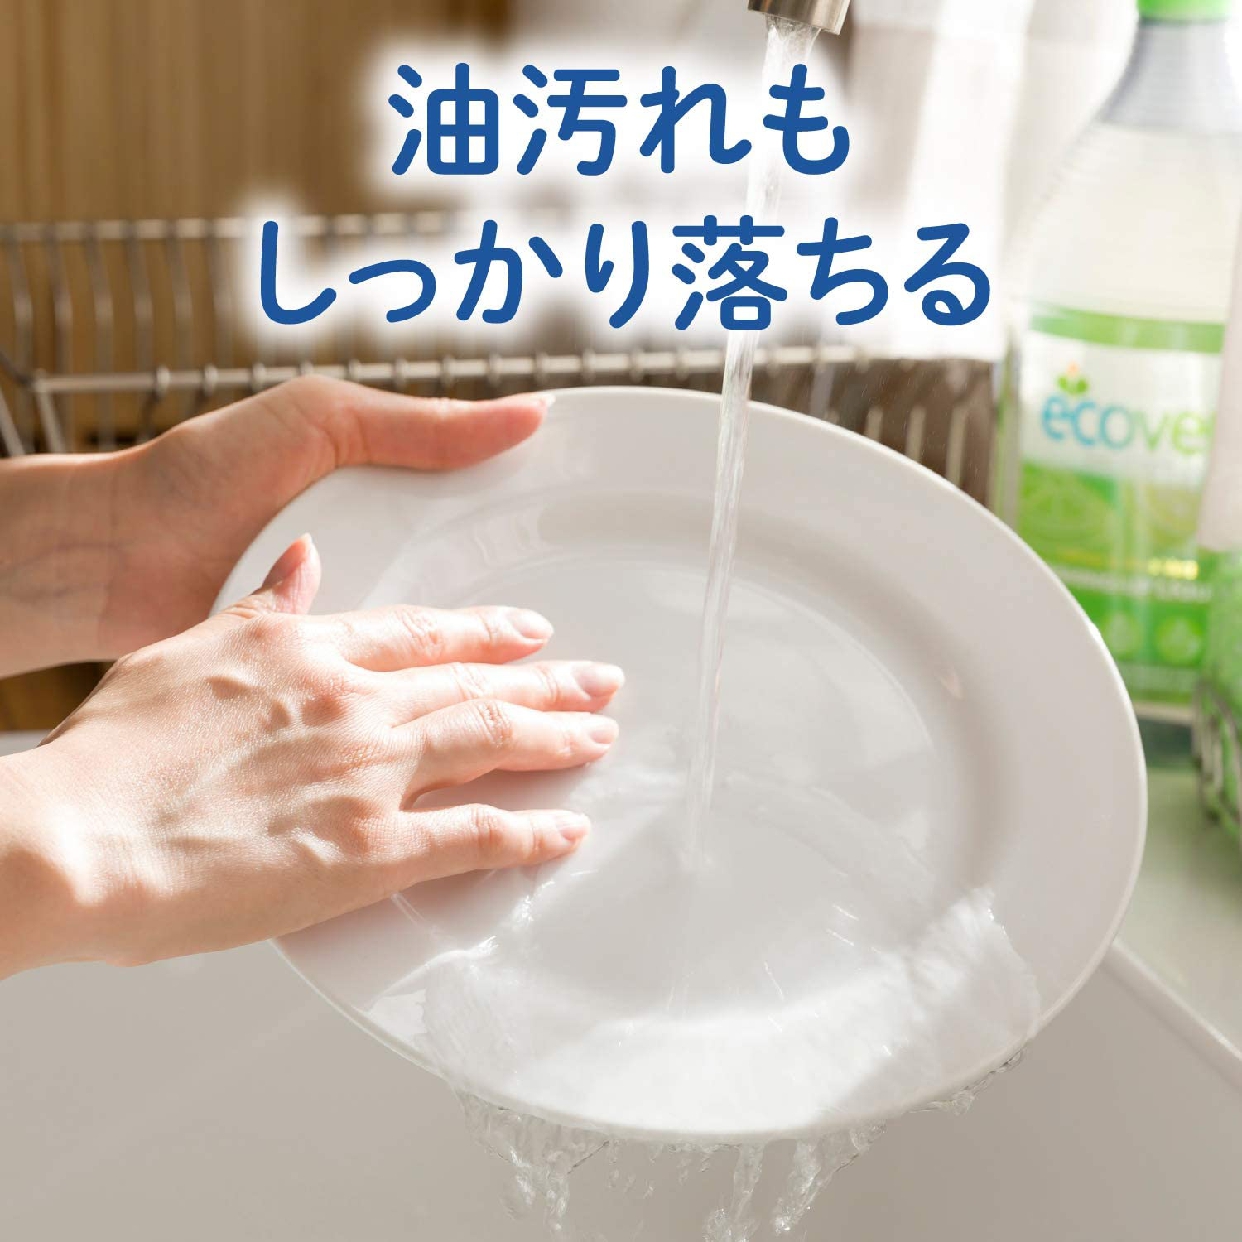 ECOVER(エコベール) 食器用洗剤の商品画像サムネ4 